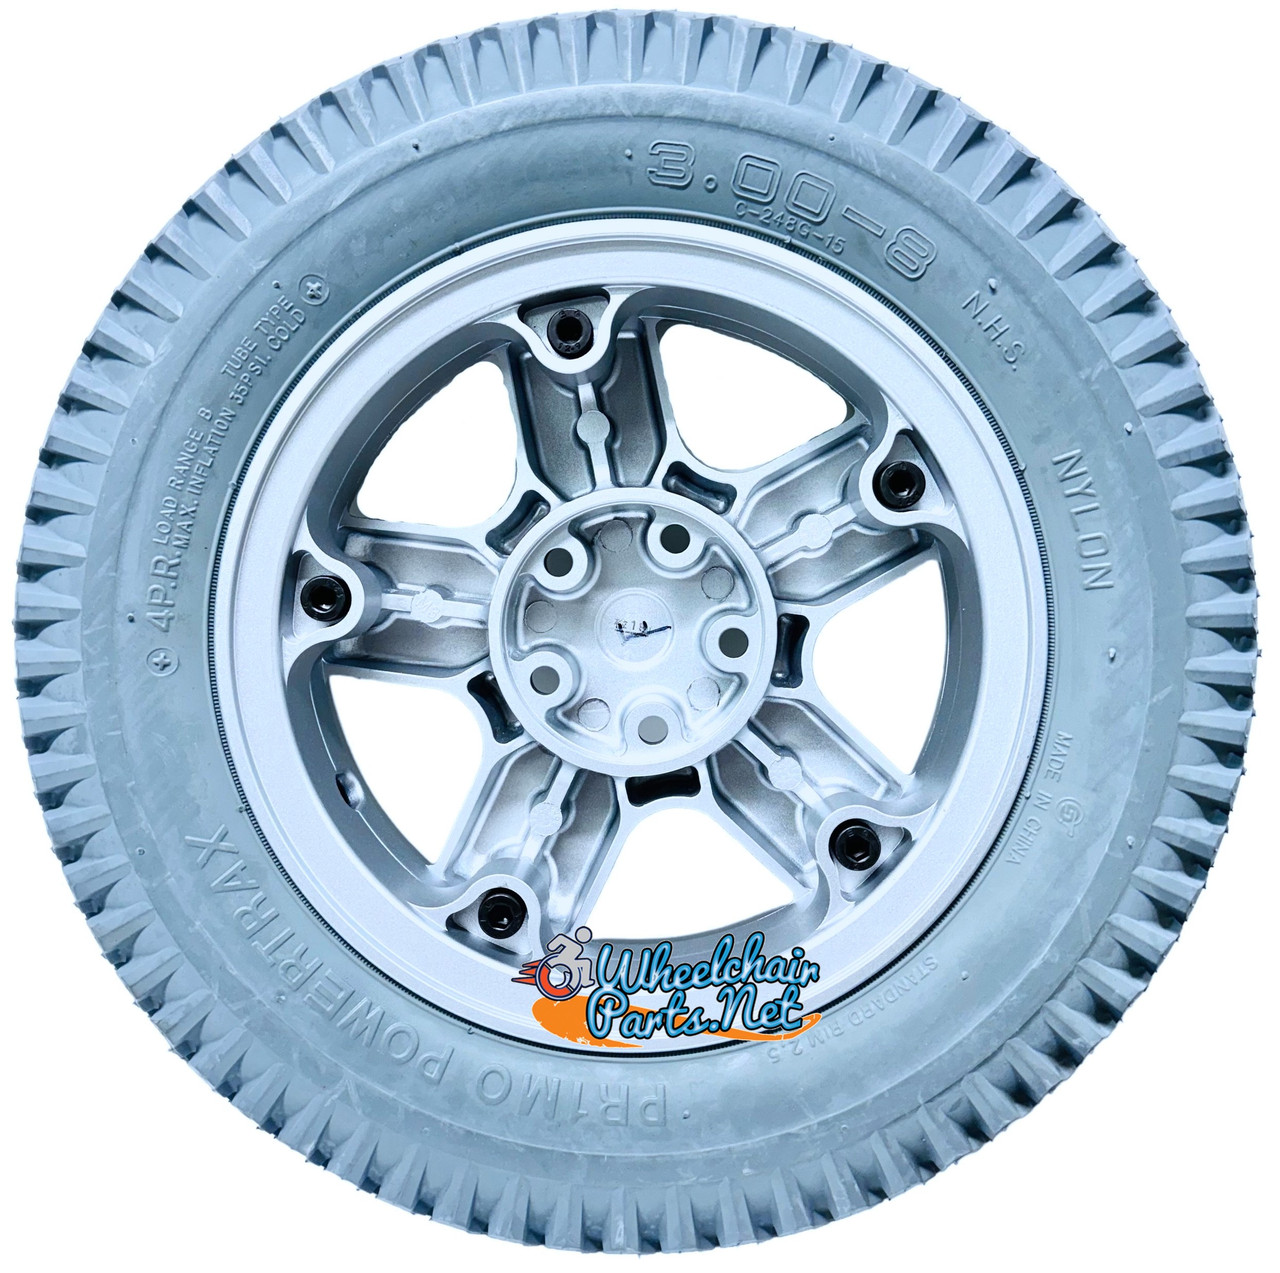 14 x 3 in (3.00-8) Invacare Drive Wheel for TDX and Storm 3G